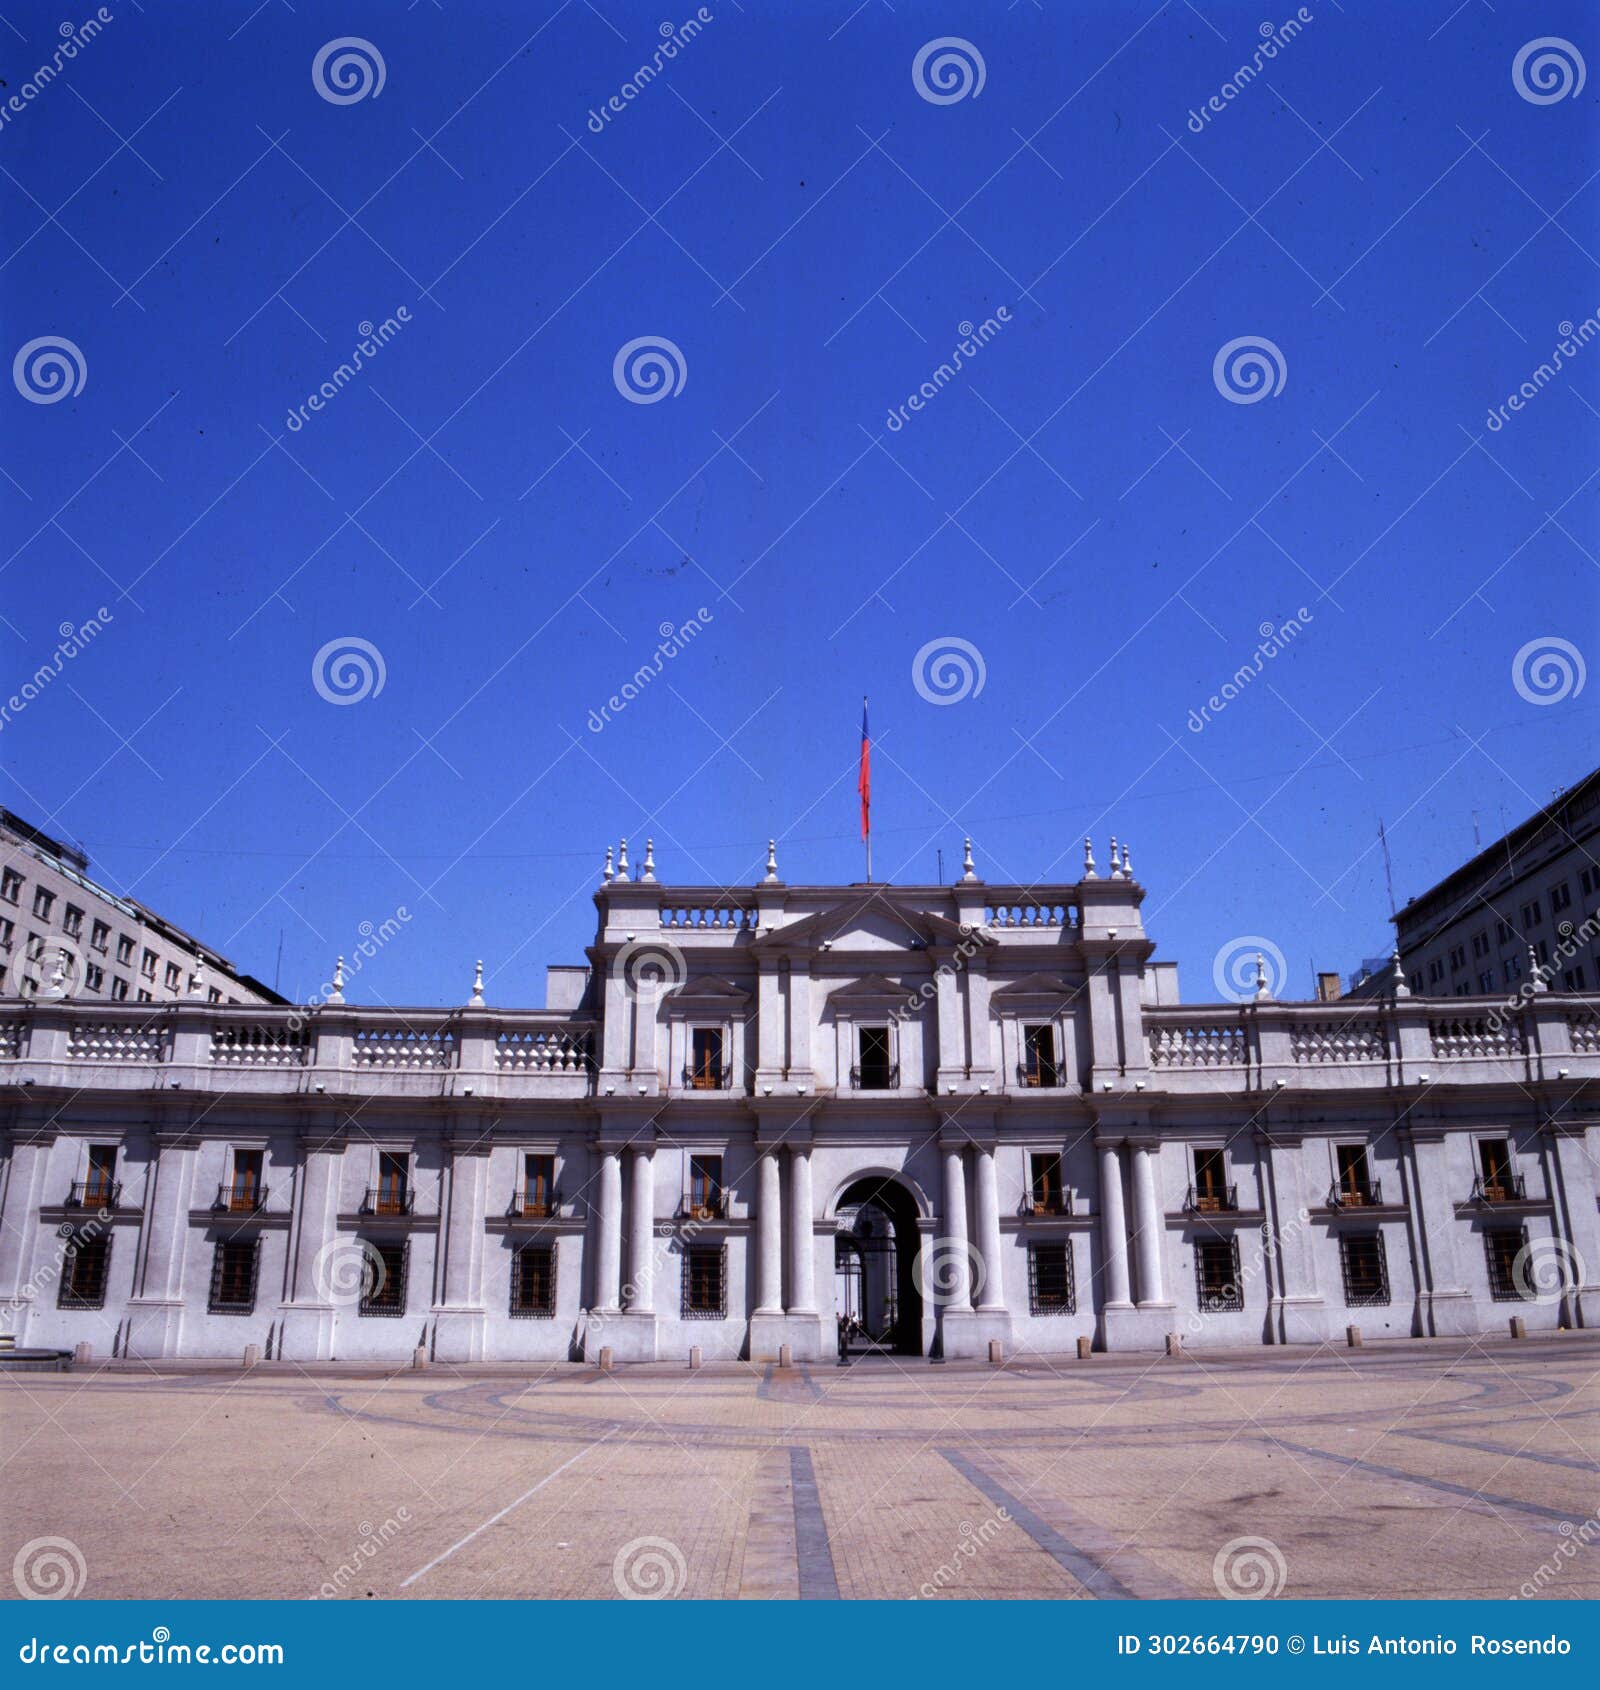 la moneda palace, seat of the president of the republic of chile, in santiago